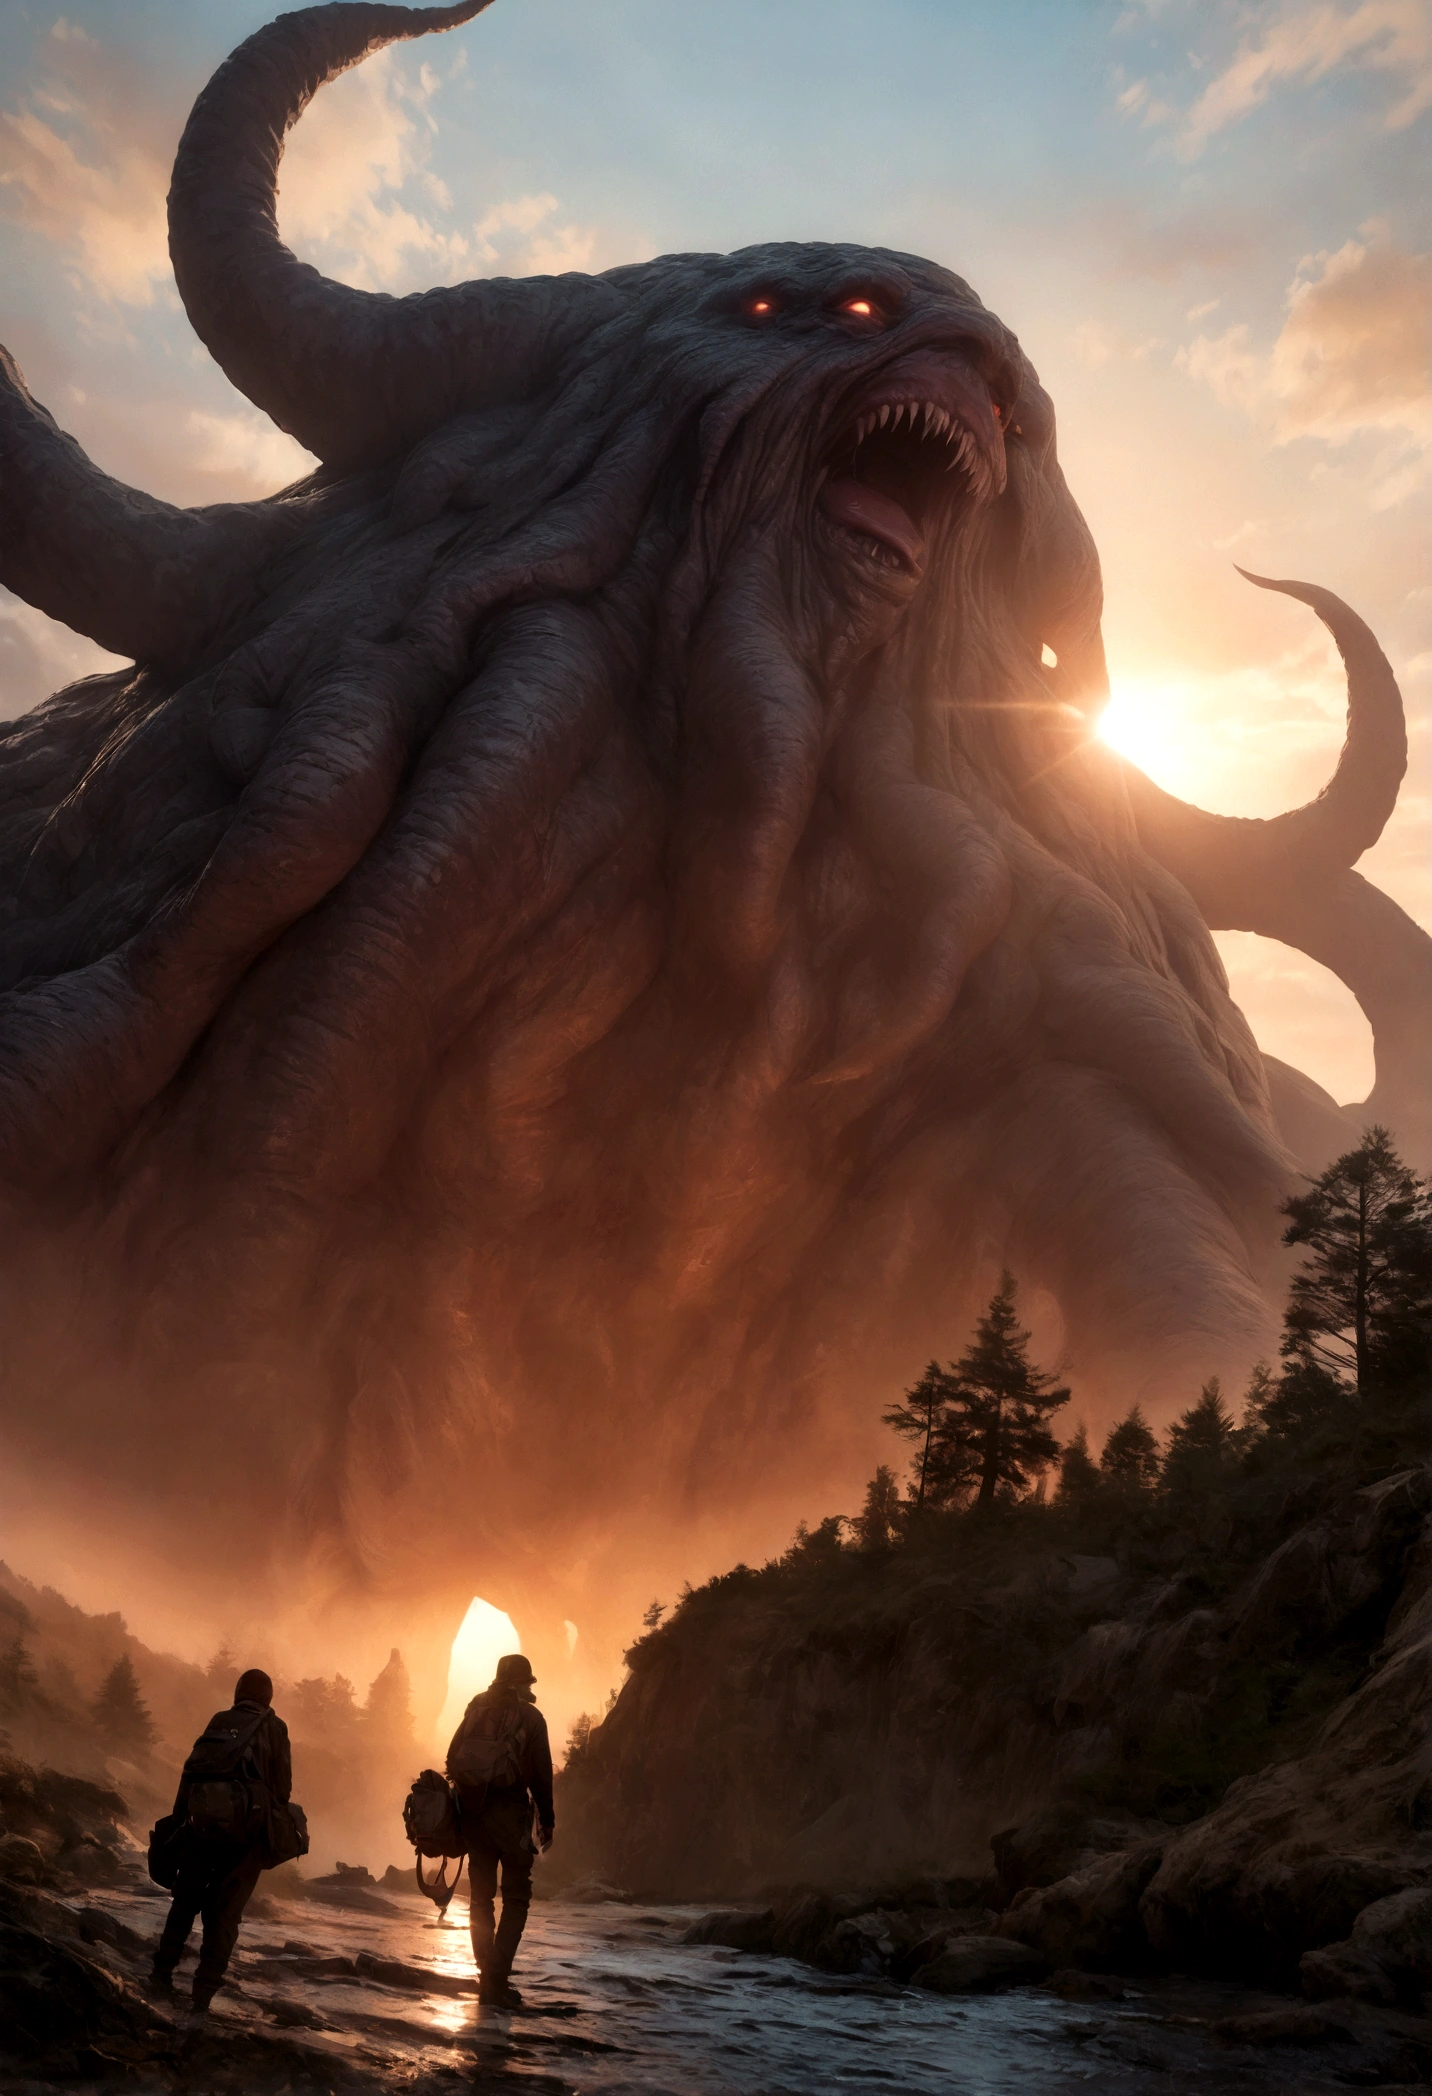 ((masterpiece, highest quality, Highest image quality, High resolution, photorealistic, Raw photo, 8K)), people taking pictures of a giant creature with their cell phones, lovecraftian background, lovecraftian atmosphere, giant cthulhu, huge creature, gigantic cthulhu, giant ethereal creature, eldritch being, lovecraftian monster, giant tentacles, an ominous fantasy illustration, looming creature with a long, nyarlathotep, lovecraftian landscape, silhouette emerging from the backlight, seen from below,